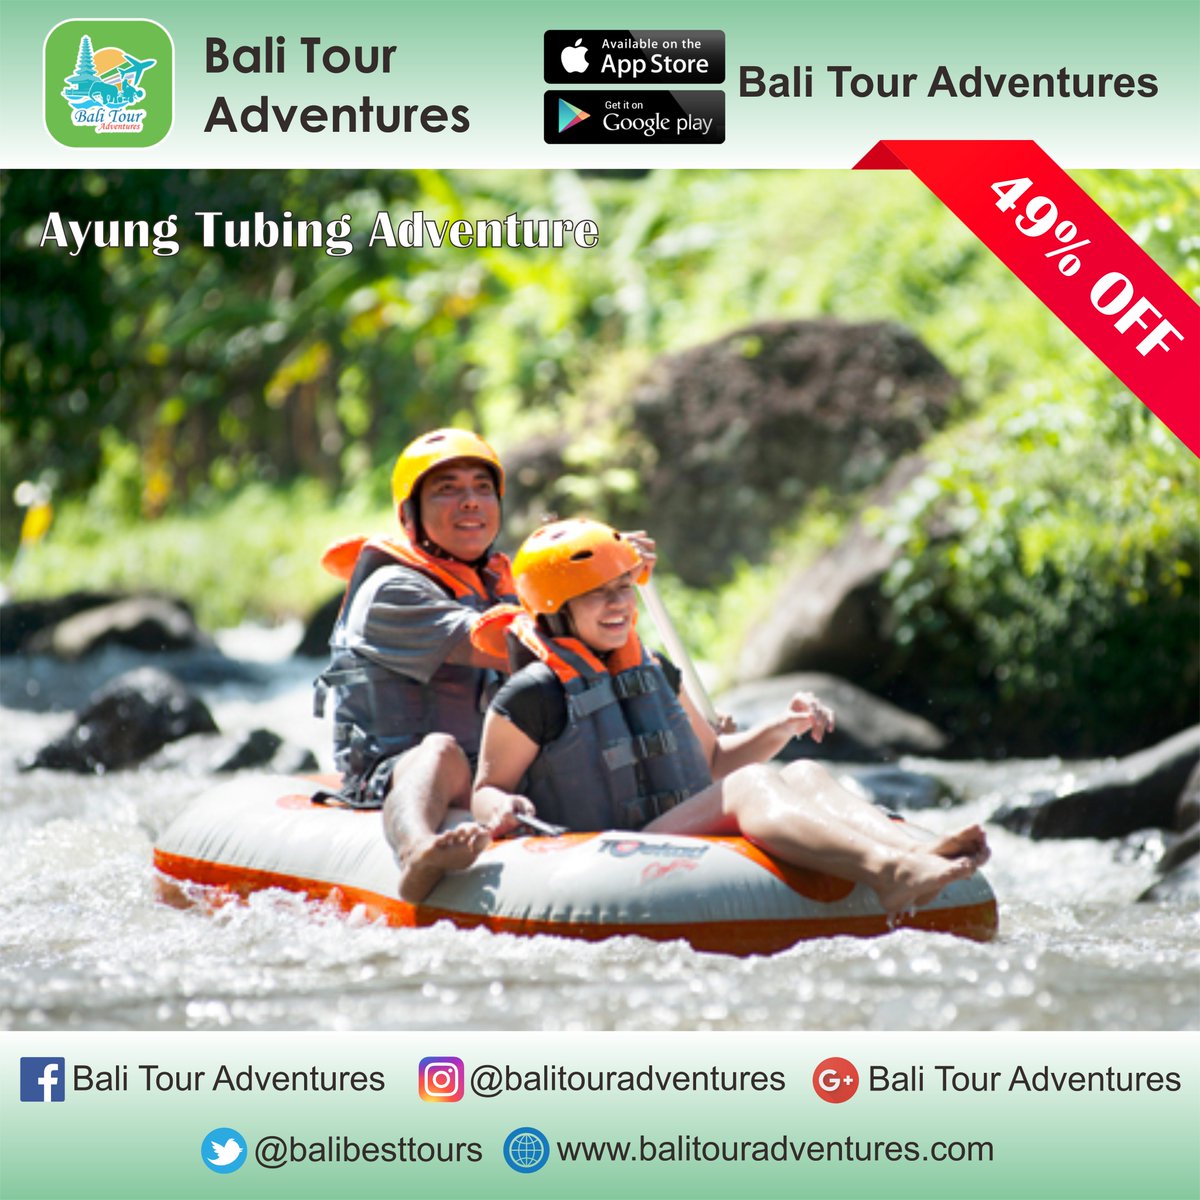 Morning guys! Our long trip will offer an excellent adventure and exiting of 3 hour trip on Ayung River. Click link : balitouradventures.com/app.php 

#ayungriver #tubing #balitubing #tubingayungriver #balitour #balitourpackage #bali #adventure #baliadventure #tubingadventure #river